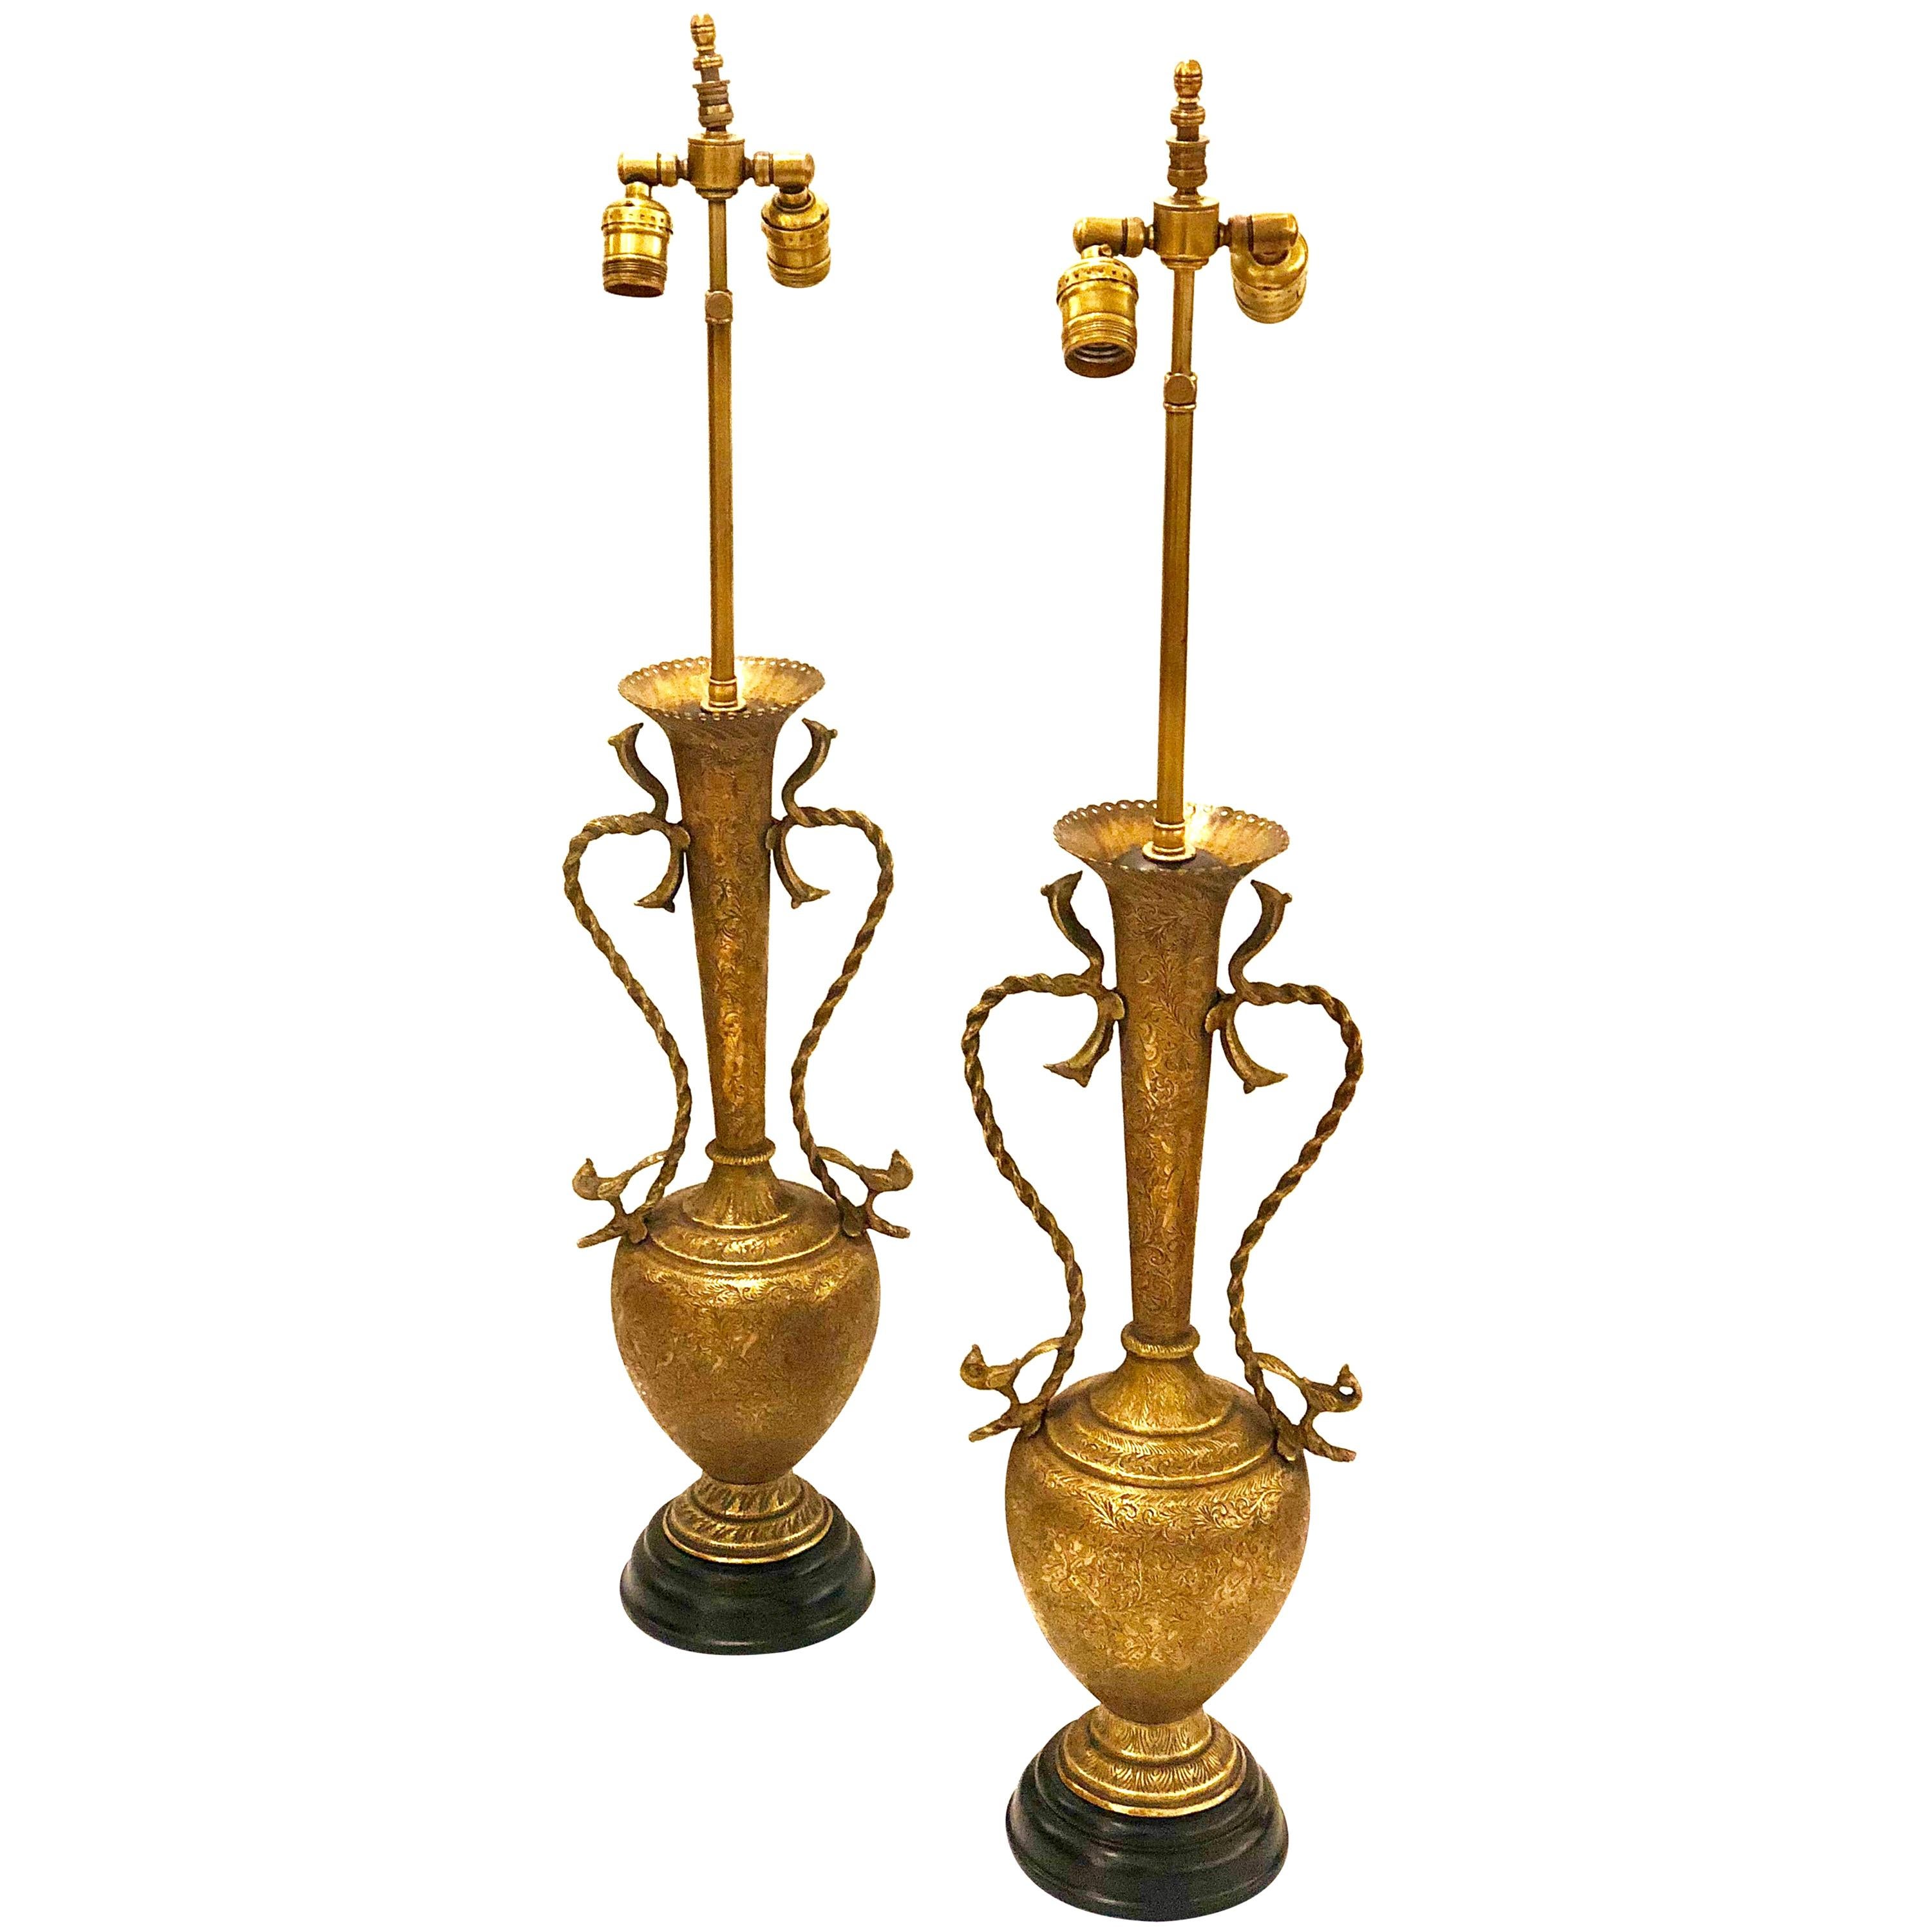 Striking Pair of Brass Hammered Antique Moroccan Table Lamps